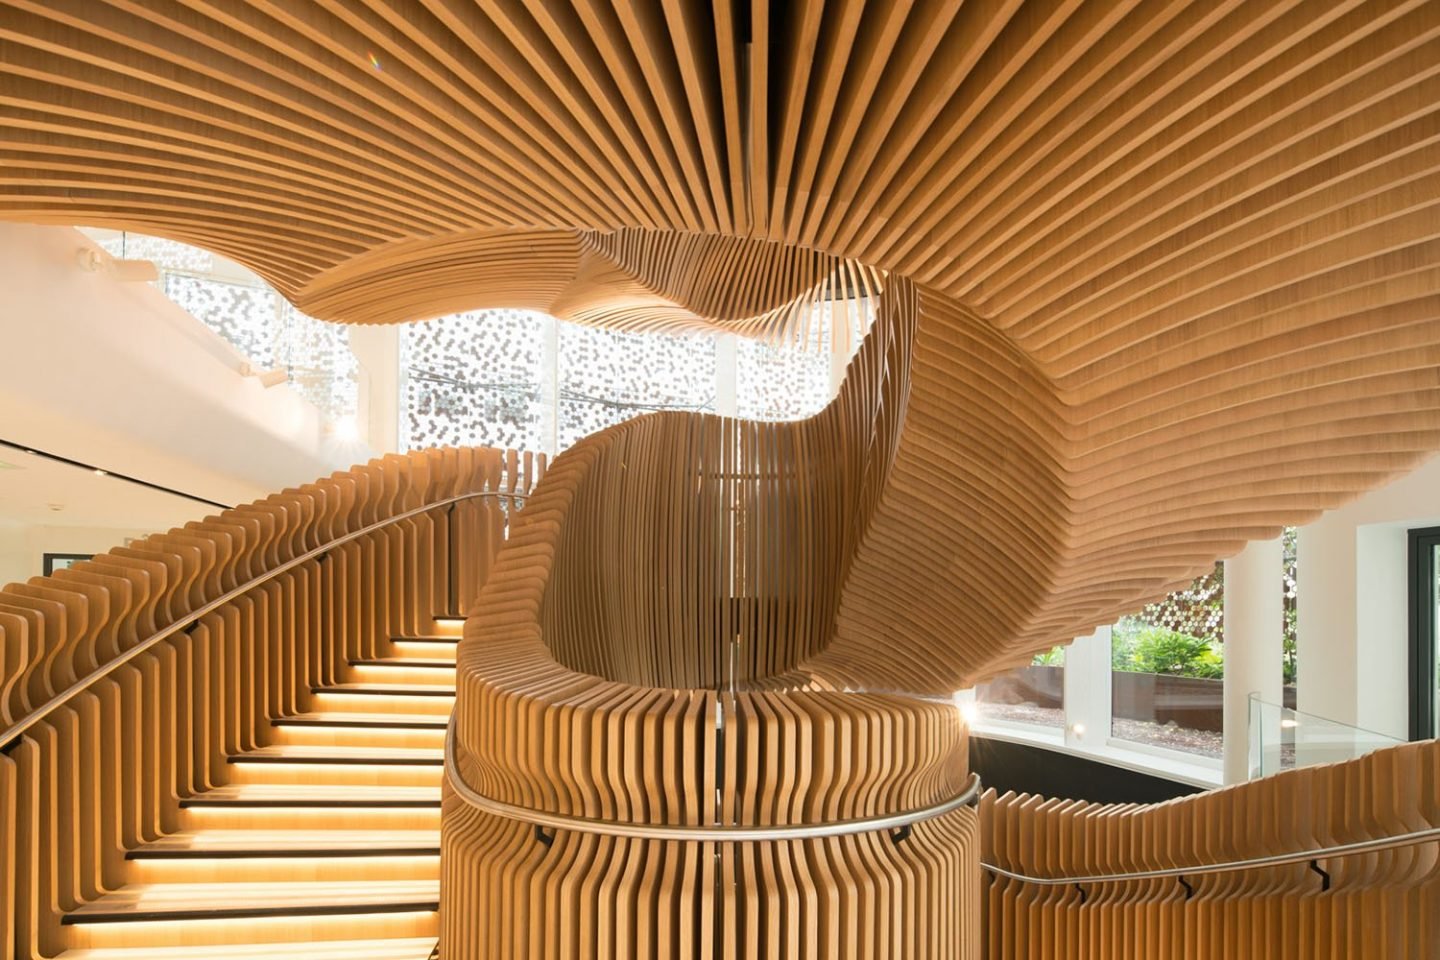 LVMH Media Division Office by Ora Ito - Parametric Architecture